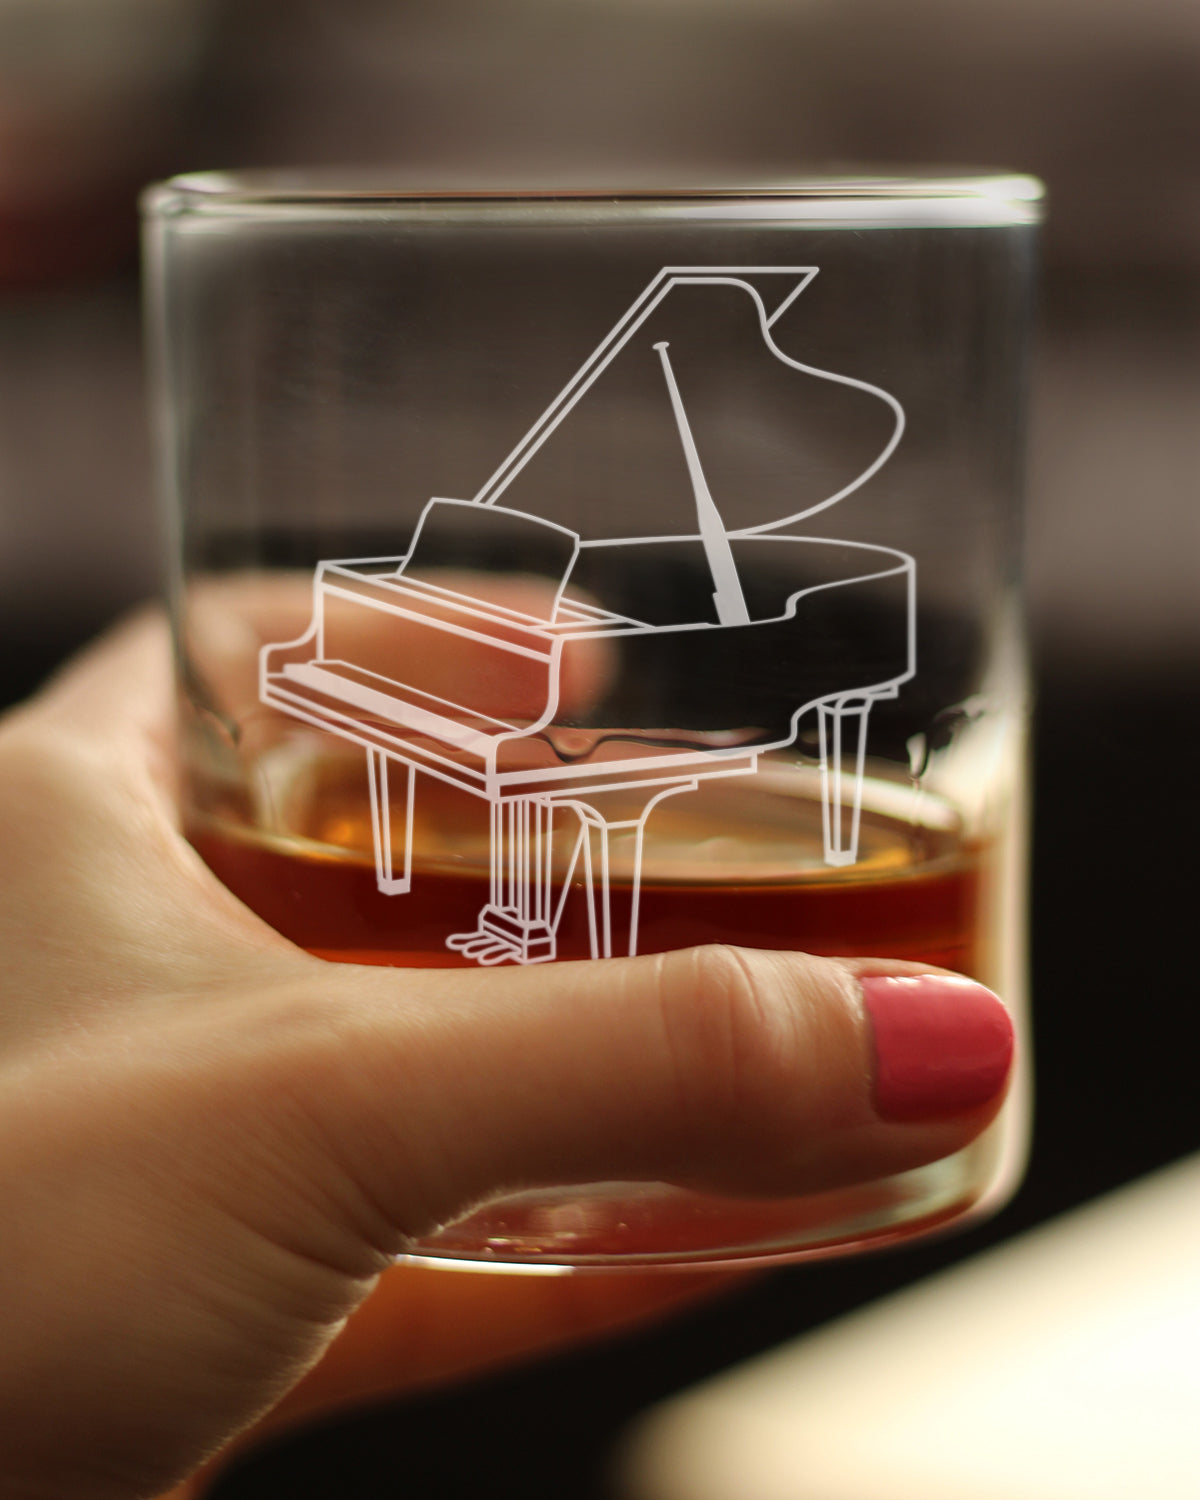 Grand Piano Rocks Glass - Music Gifts for Piano Players, Teachers and Musical Accessories for Musicians that Play Keys - 10.25 Oz Glasses